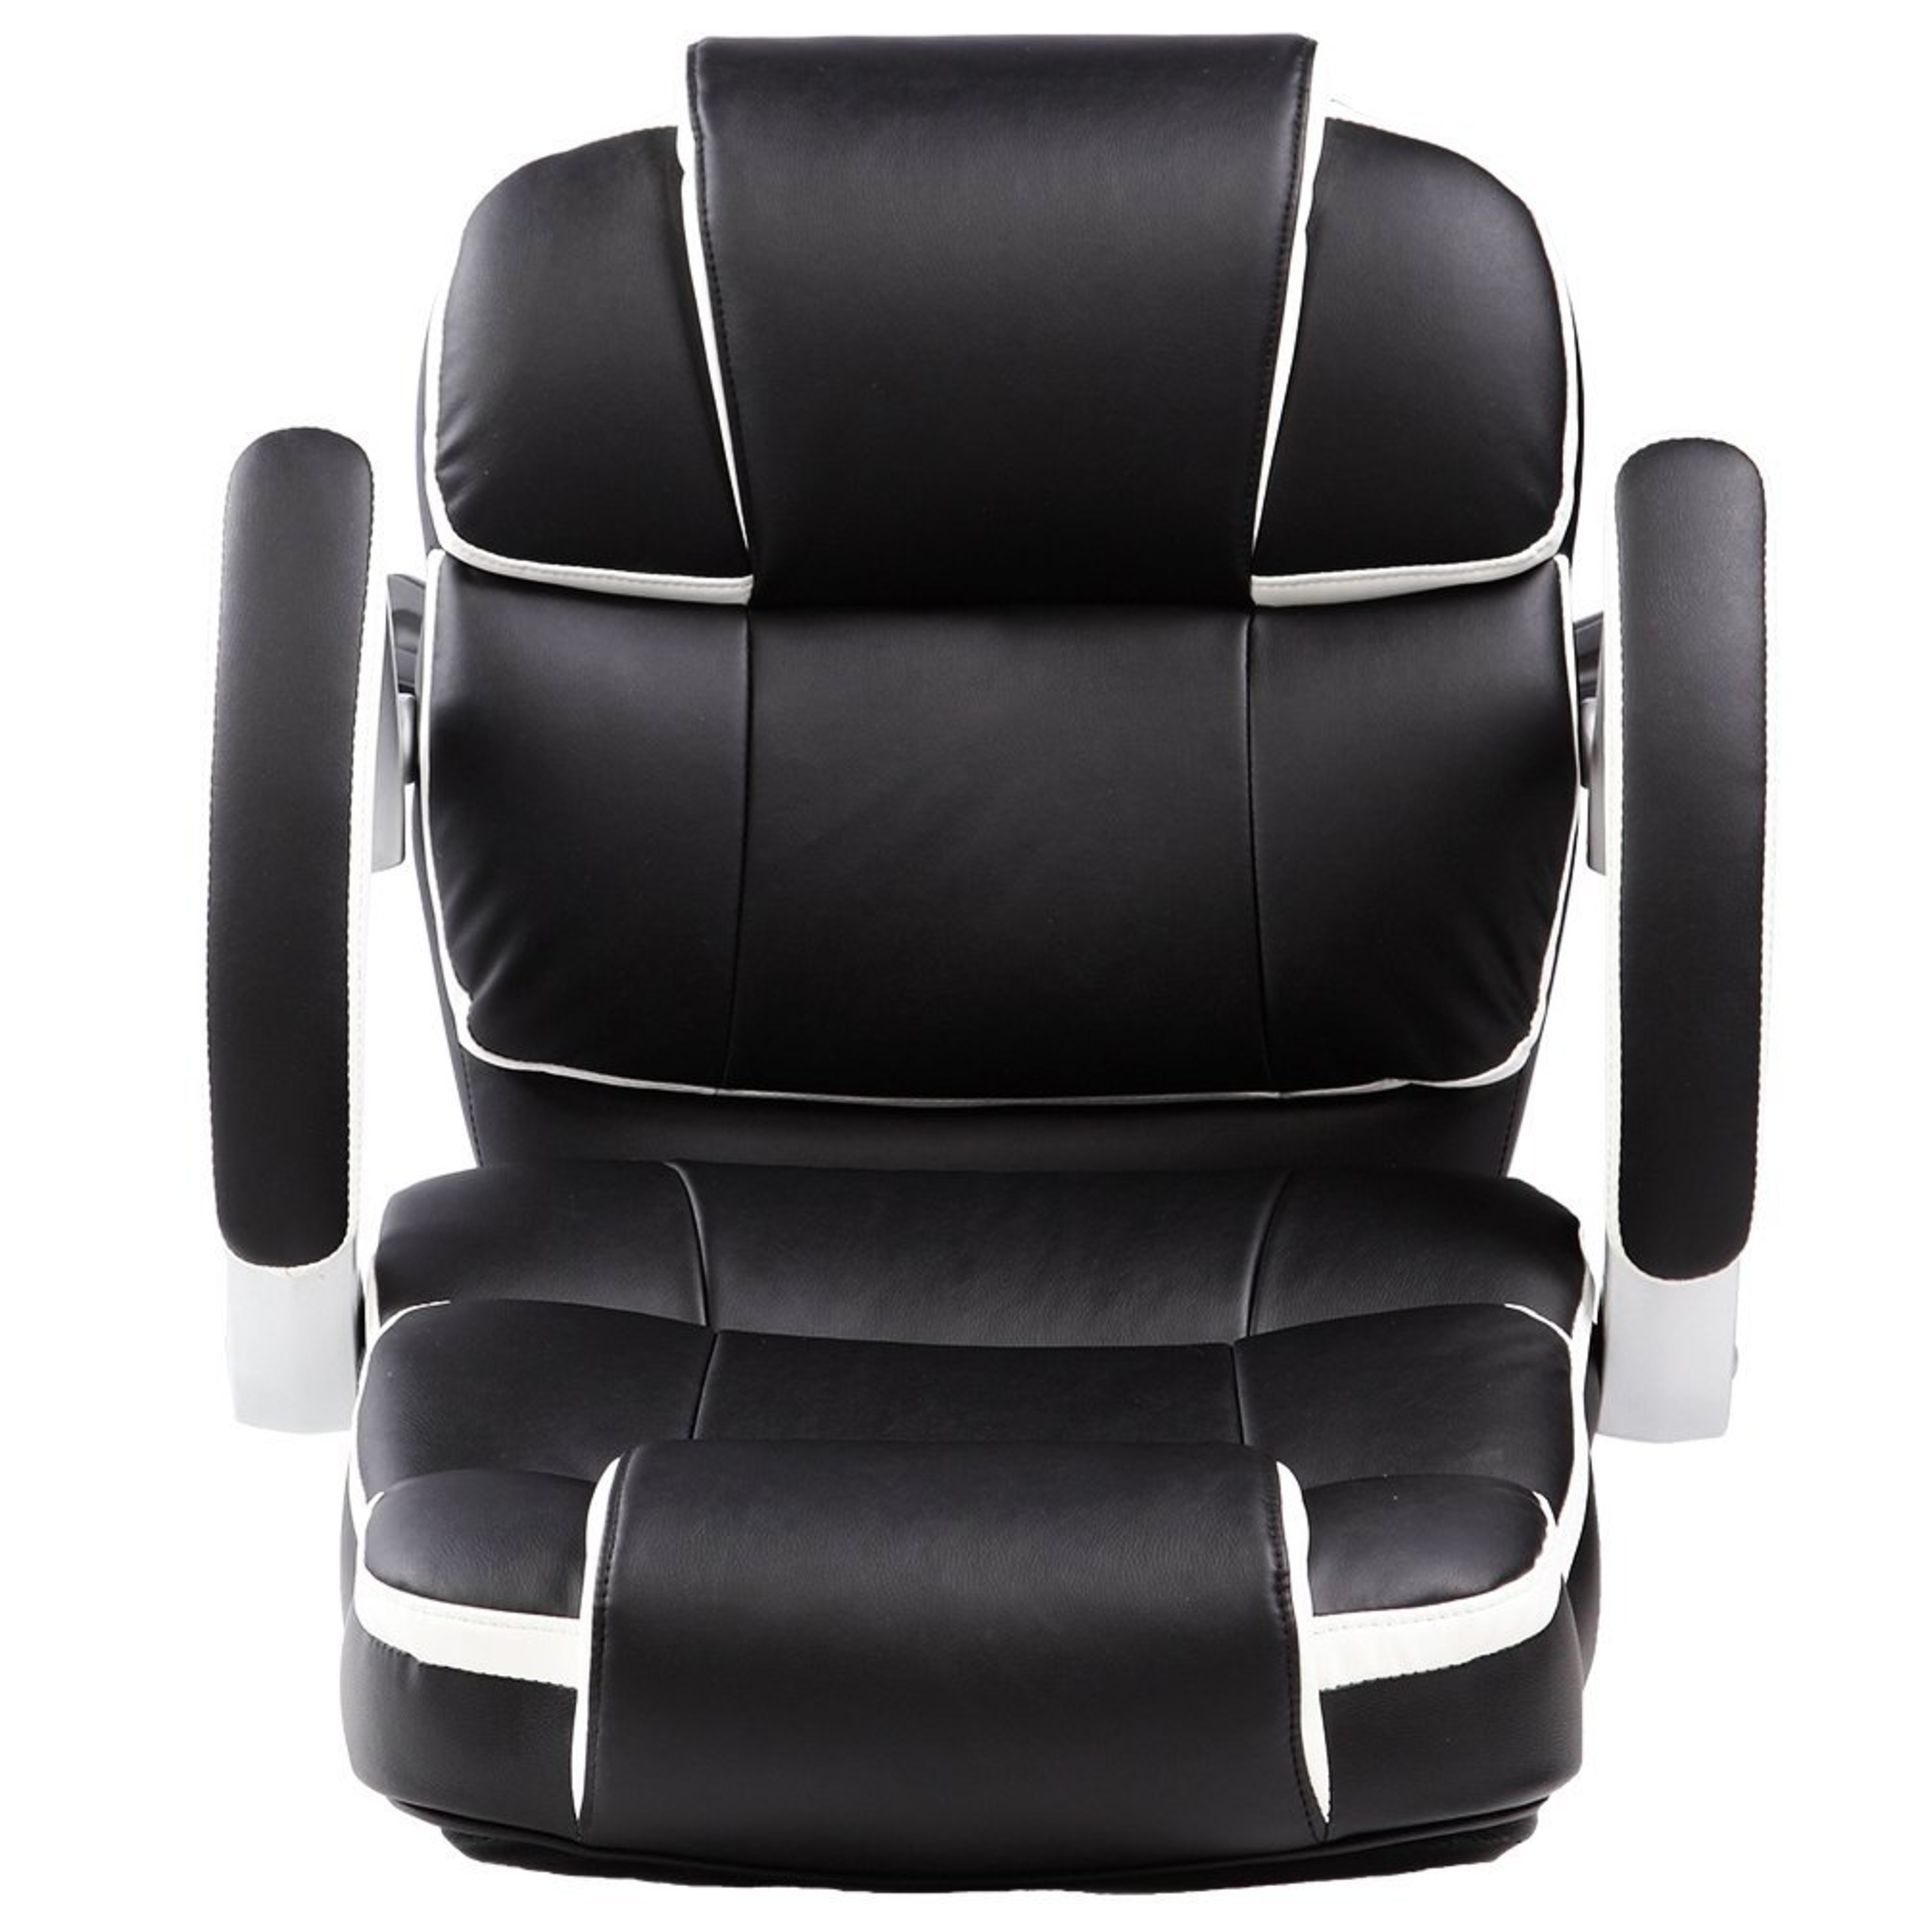 (TD79) Luxury Designer Computer Office Chair - Black with White Accents Our renowned high qu... - Image 2 of 2